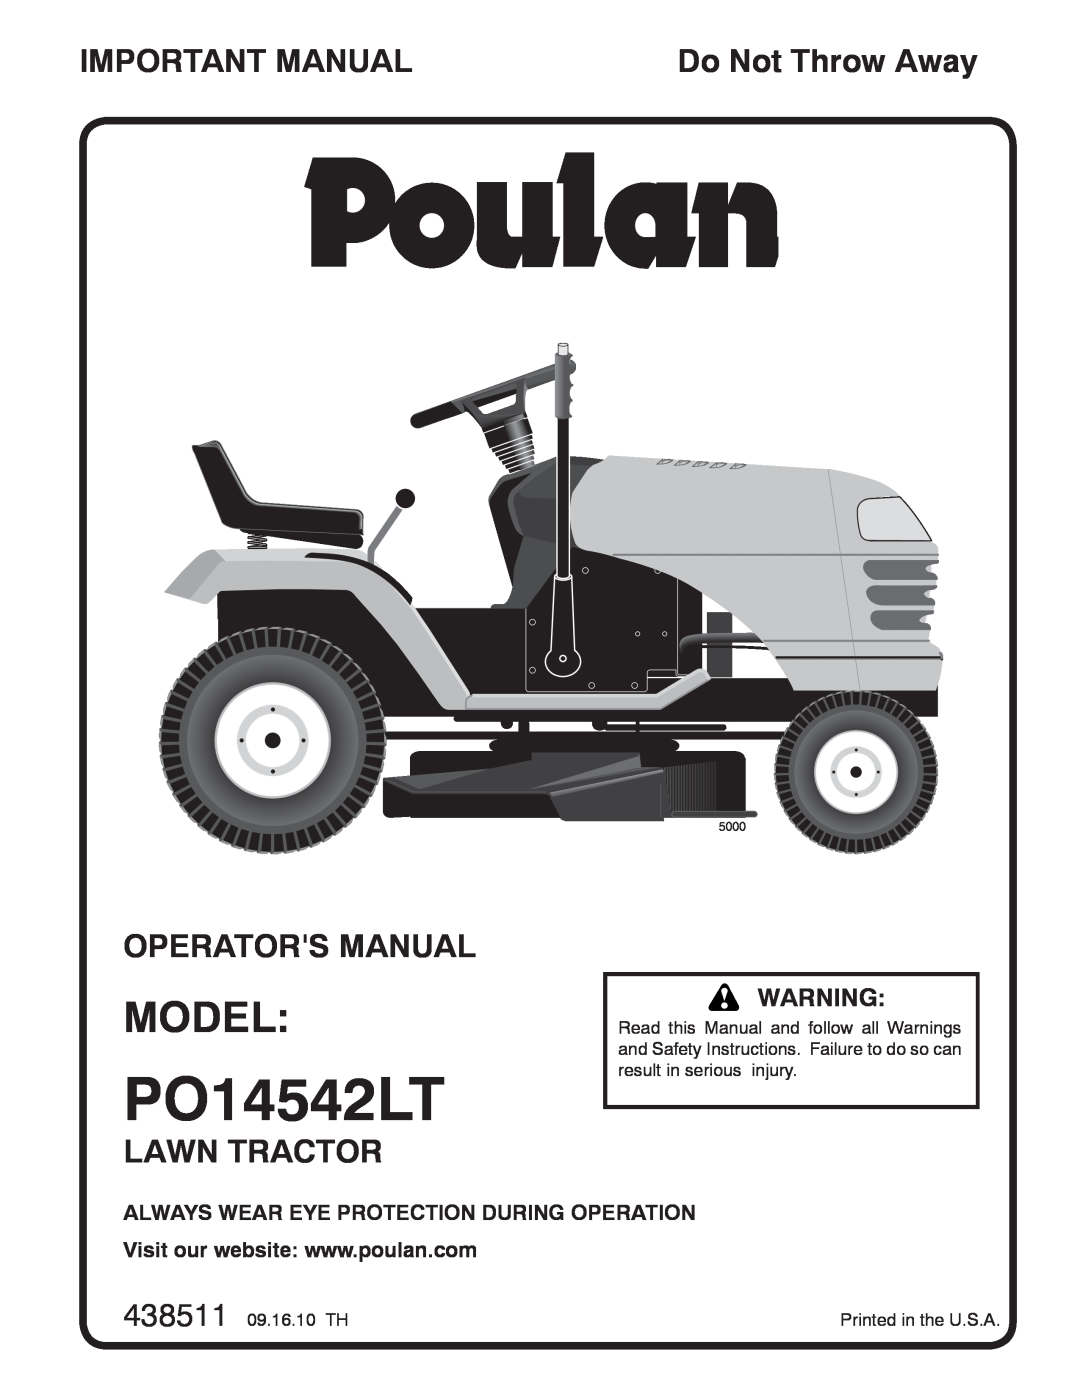 Poulan PO14542LT, 438511 manual Model, Important Manual, Operators Manual, Lawn Tractor, Do Not Throw Away, 5000 